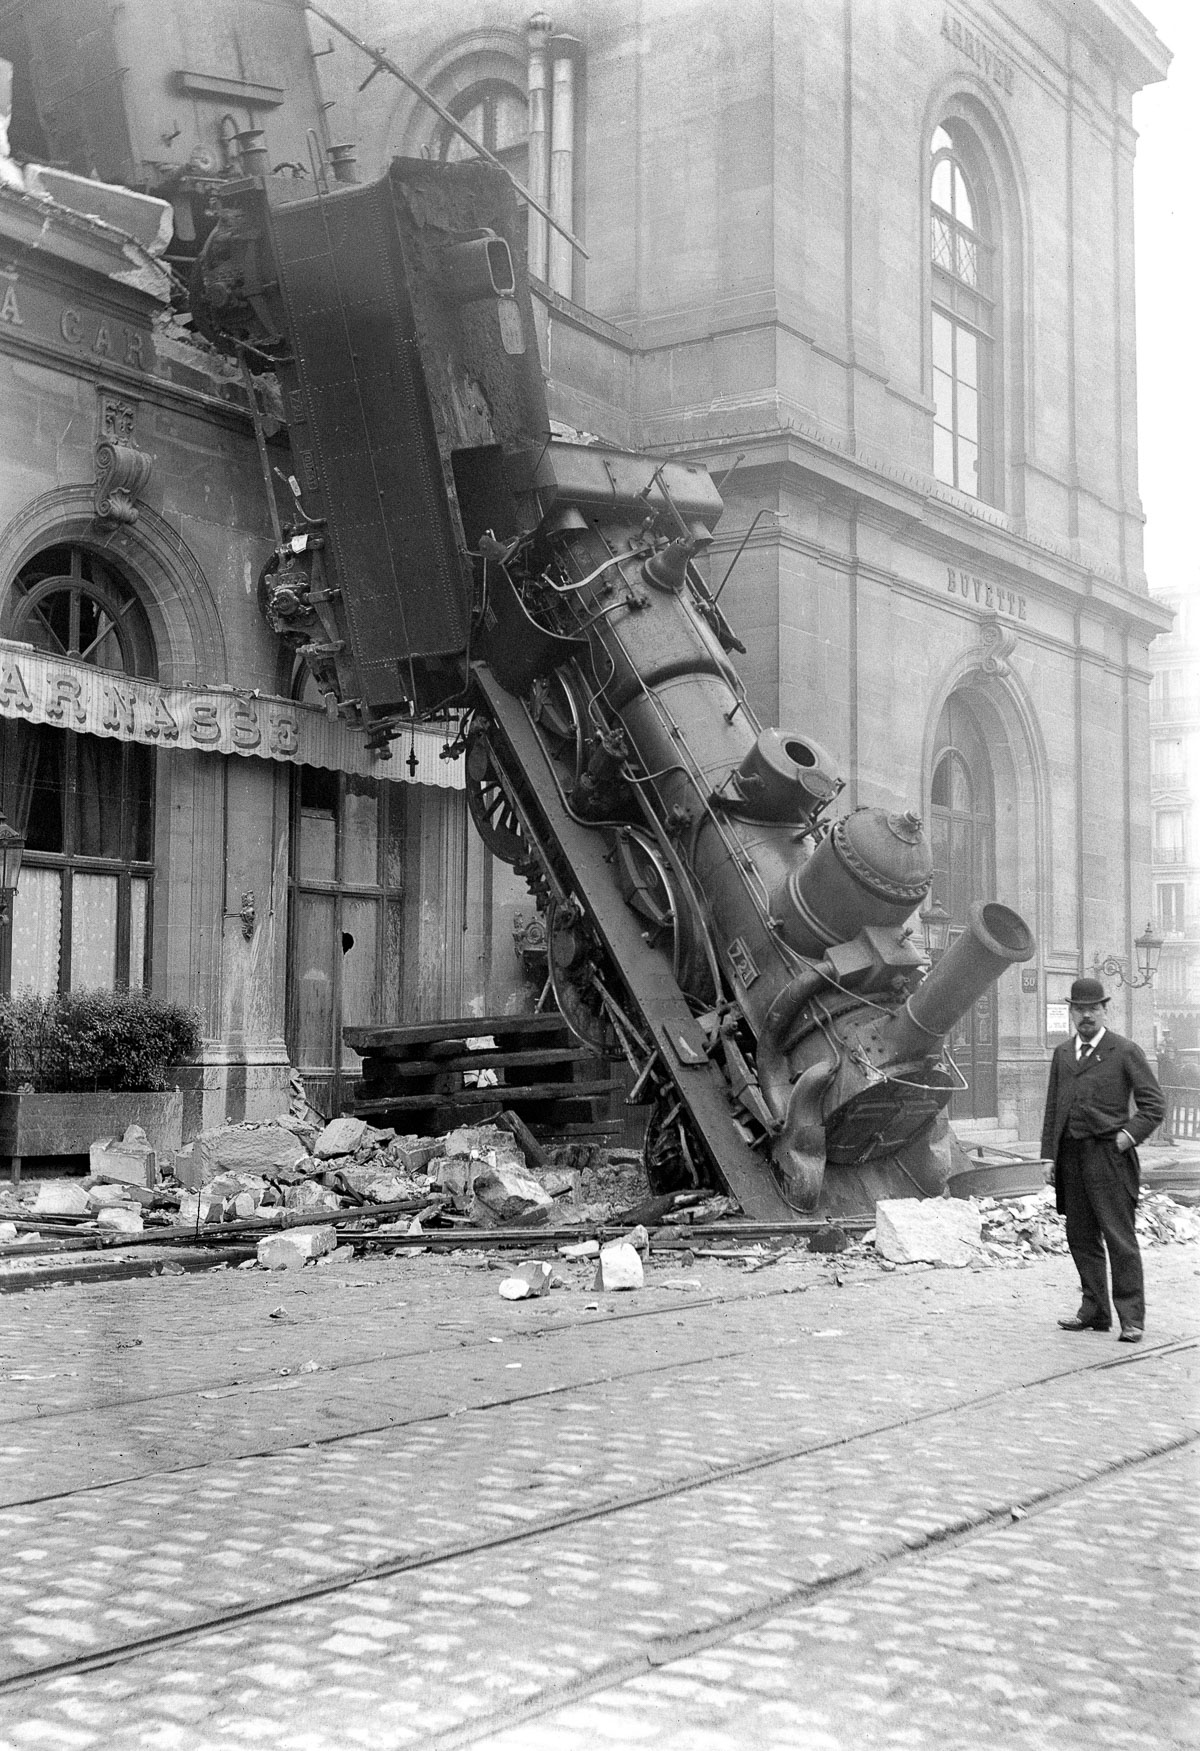 22 Oct 1895, Paris, France --- Accident of the Montparnasse railway station in Paris (France). On October 22, 1895. --- Image by © adoc-photos/Corbis